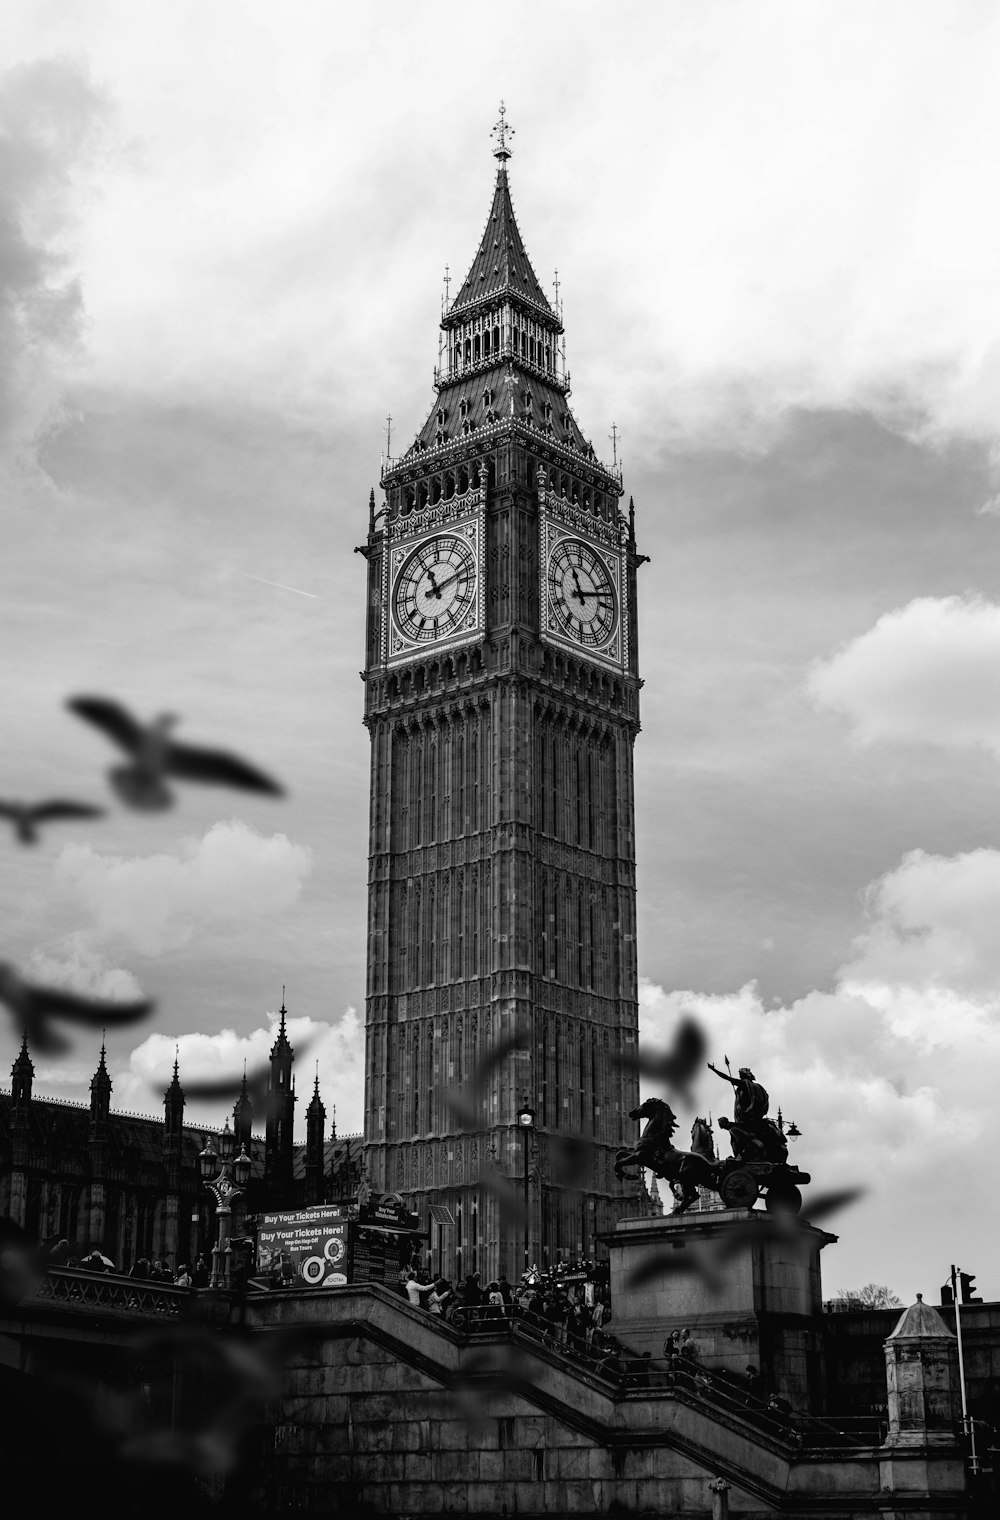 a black and white photo of the big ben clock tower